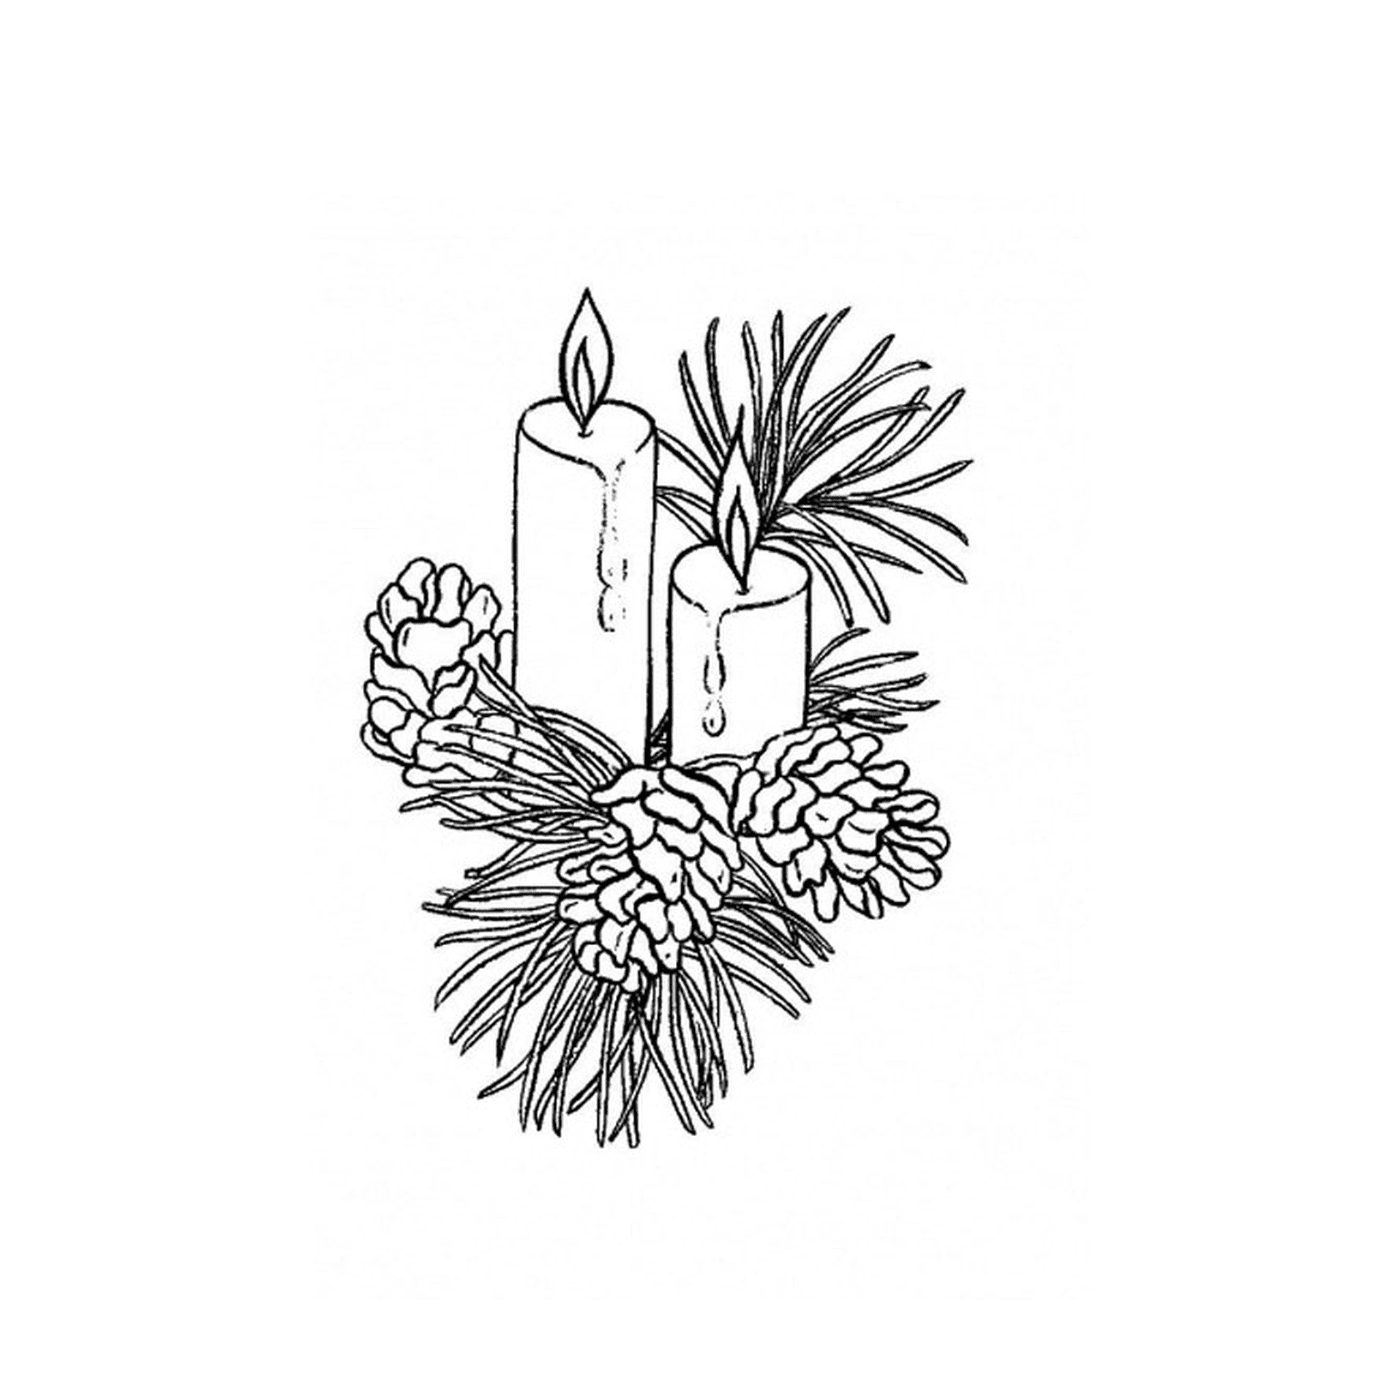  Two candles lit on a pine branch 